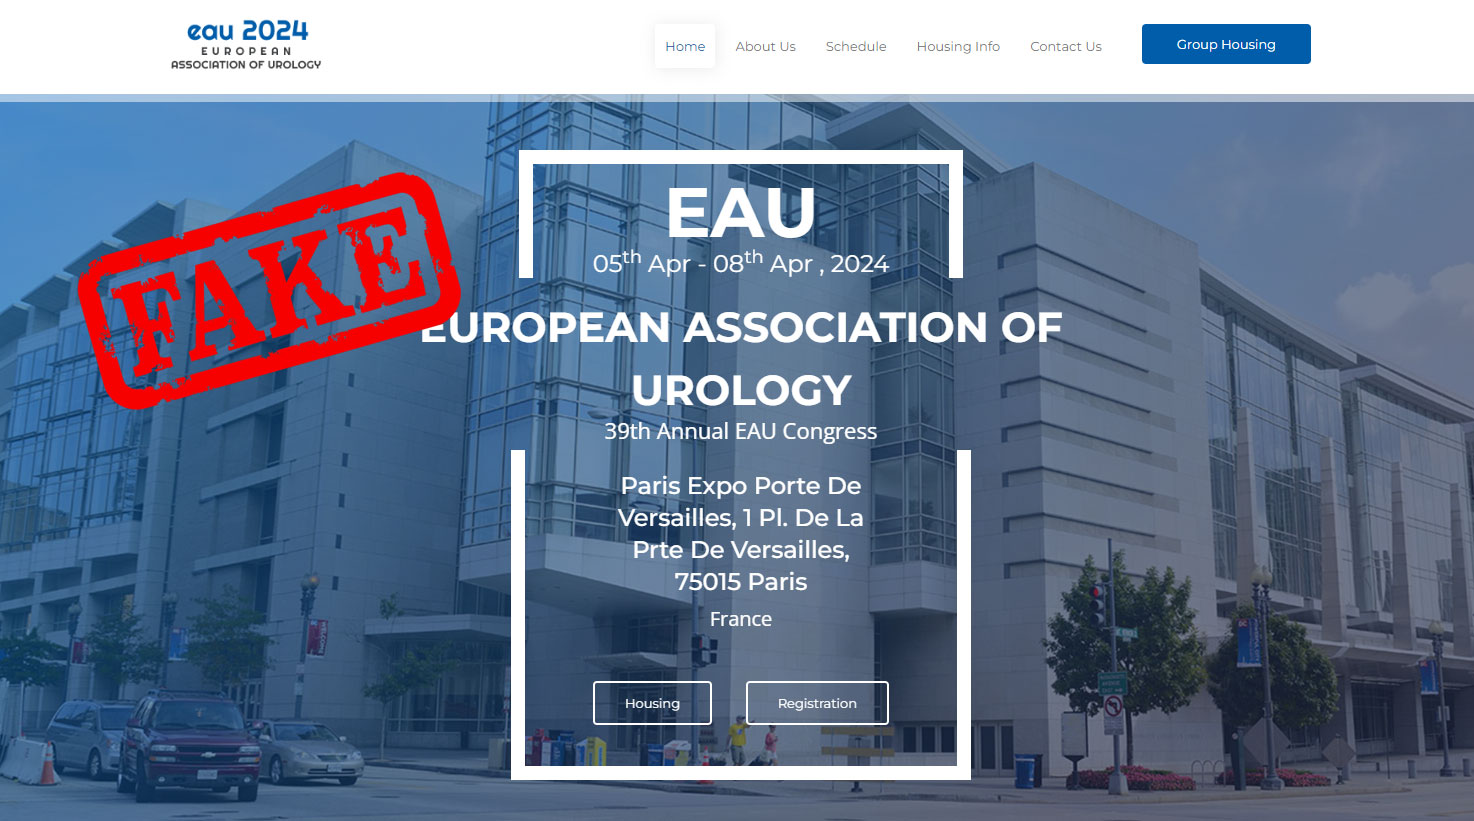 eau2024congress dot org is a fake website. You may lose any money you pay and be left with no rooms or registrations.